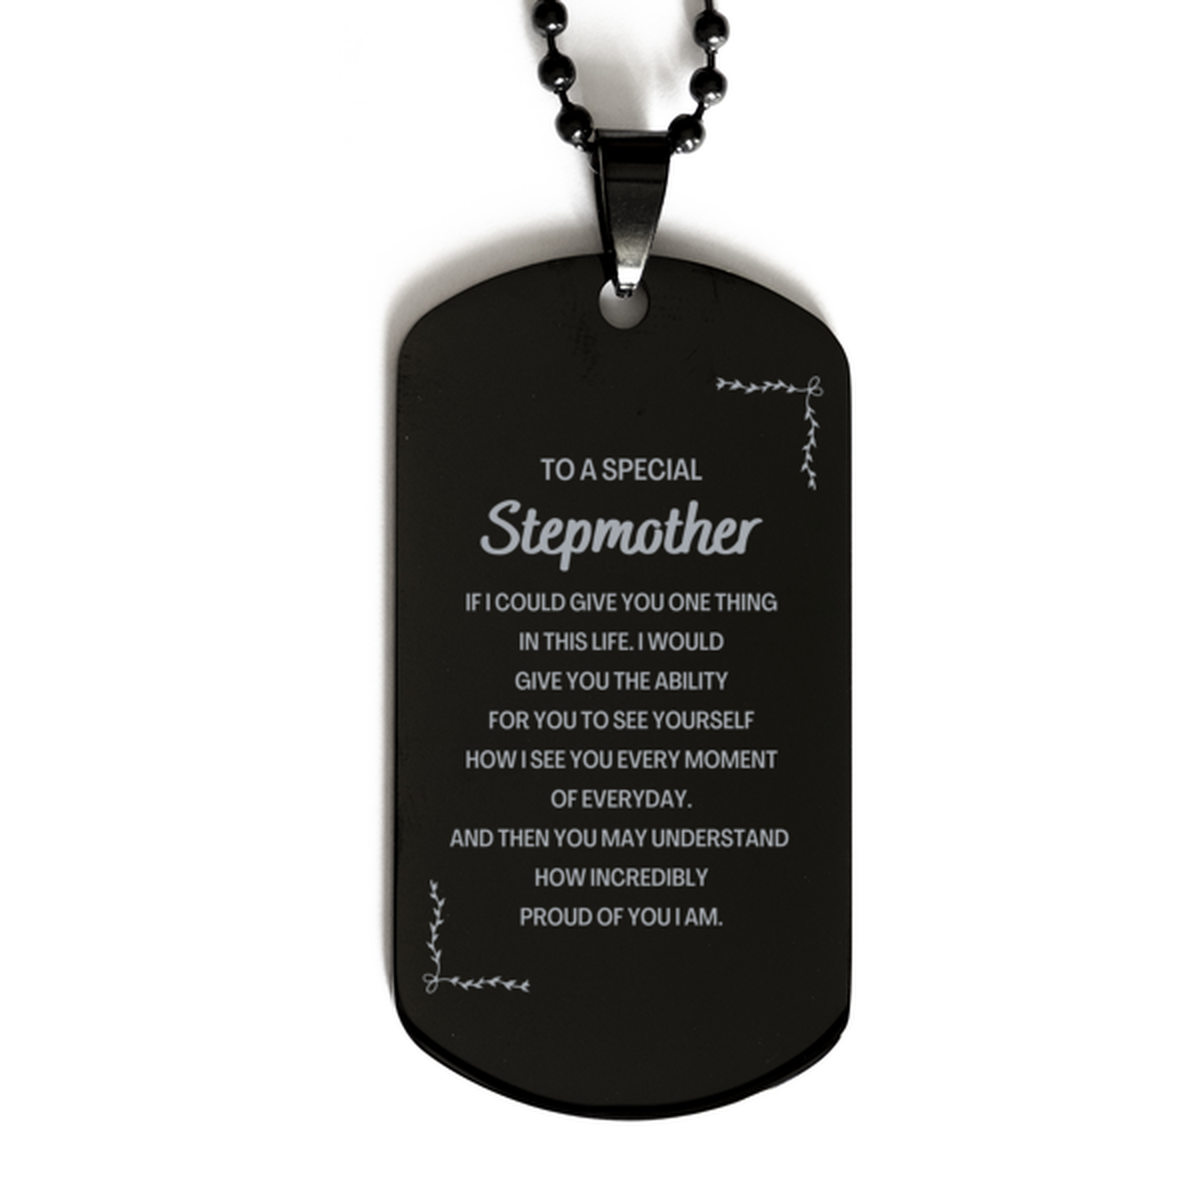 To My Stepmother Black Dog Tag, Gifts For Stepmother Engraved, Inspirational Gifts for Christmas Birthday, Epic Gifts for Stepmother To A Special Stepmother how incredibly proud of you I am